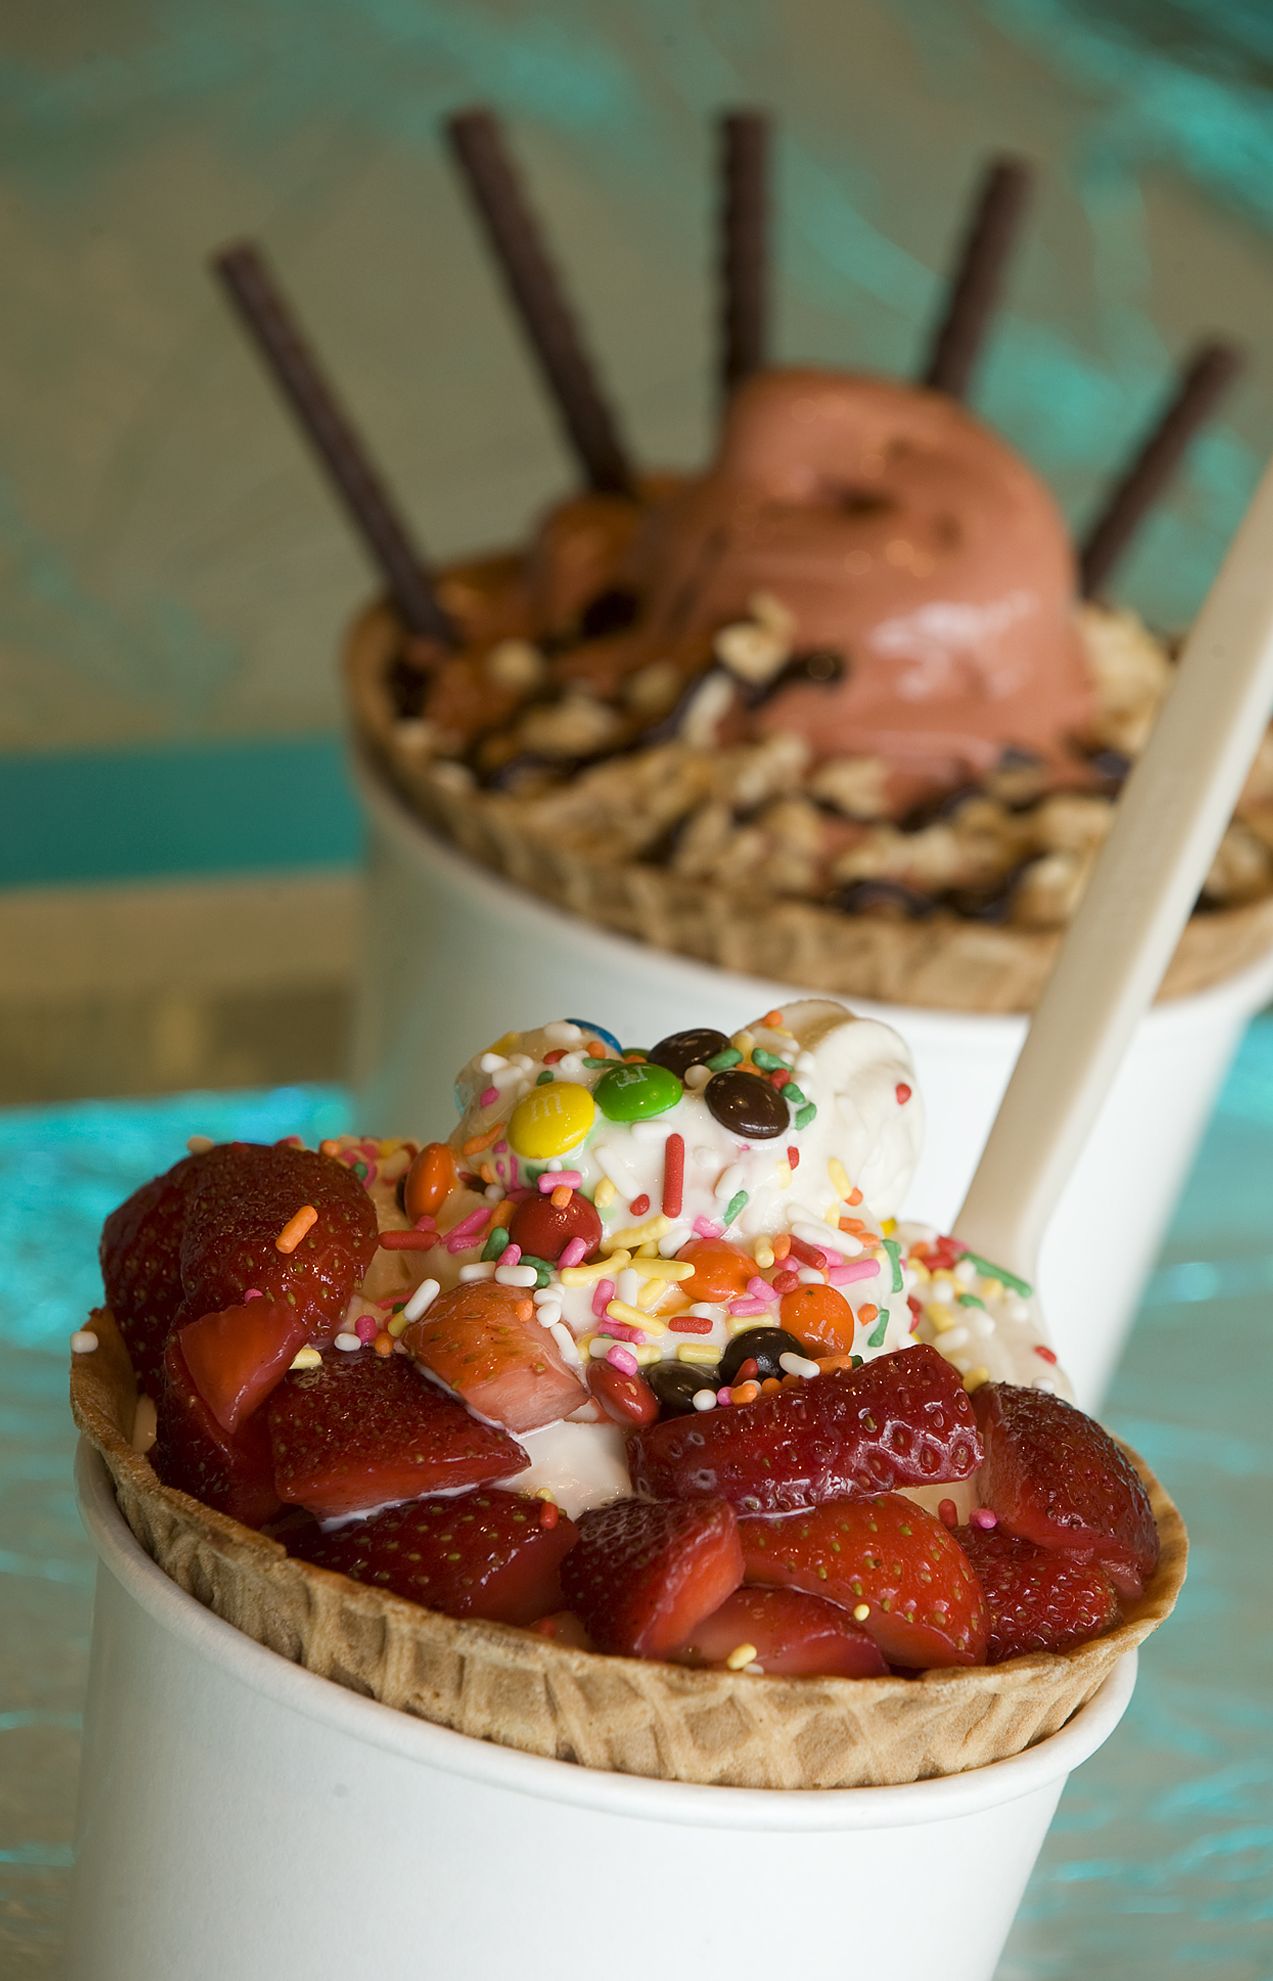 Frozen yogurt aficionados can pick from a wide array of toppings at Yo 2 Go in Vancouver.